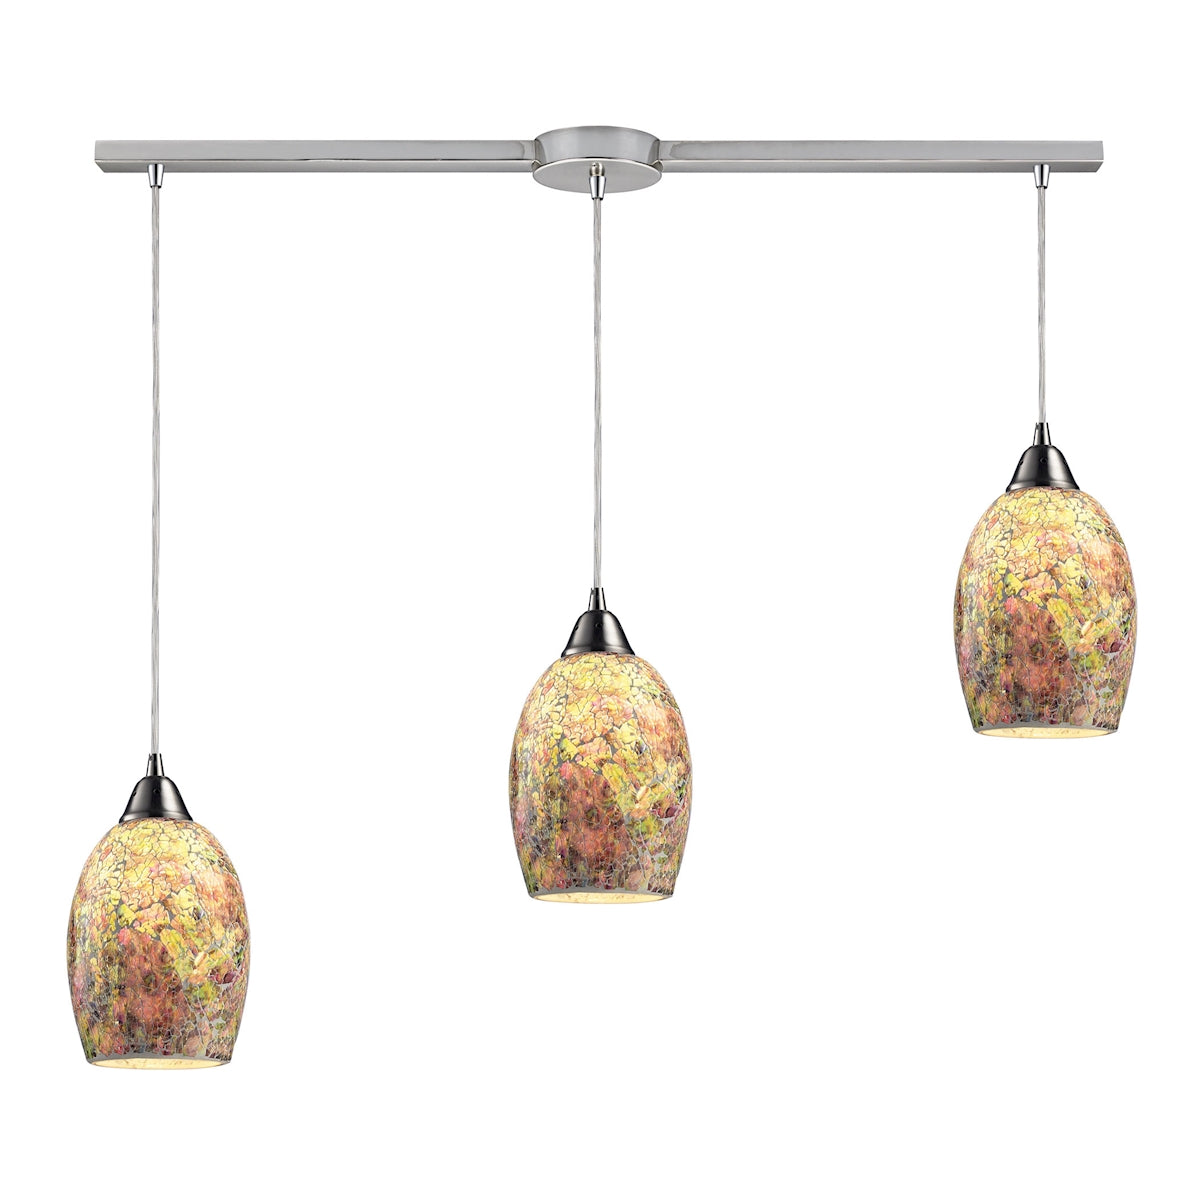 ELK Lighting 73021-3L Avalon 3-Light Linear Pendant Fixture in Satin Nickel with Multi-colored Crackle Glass